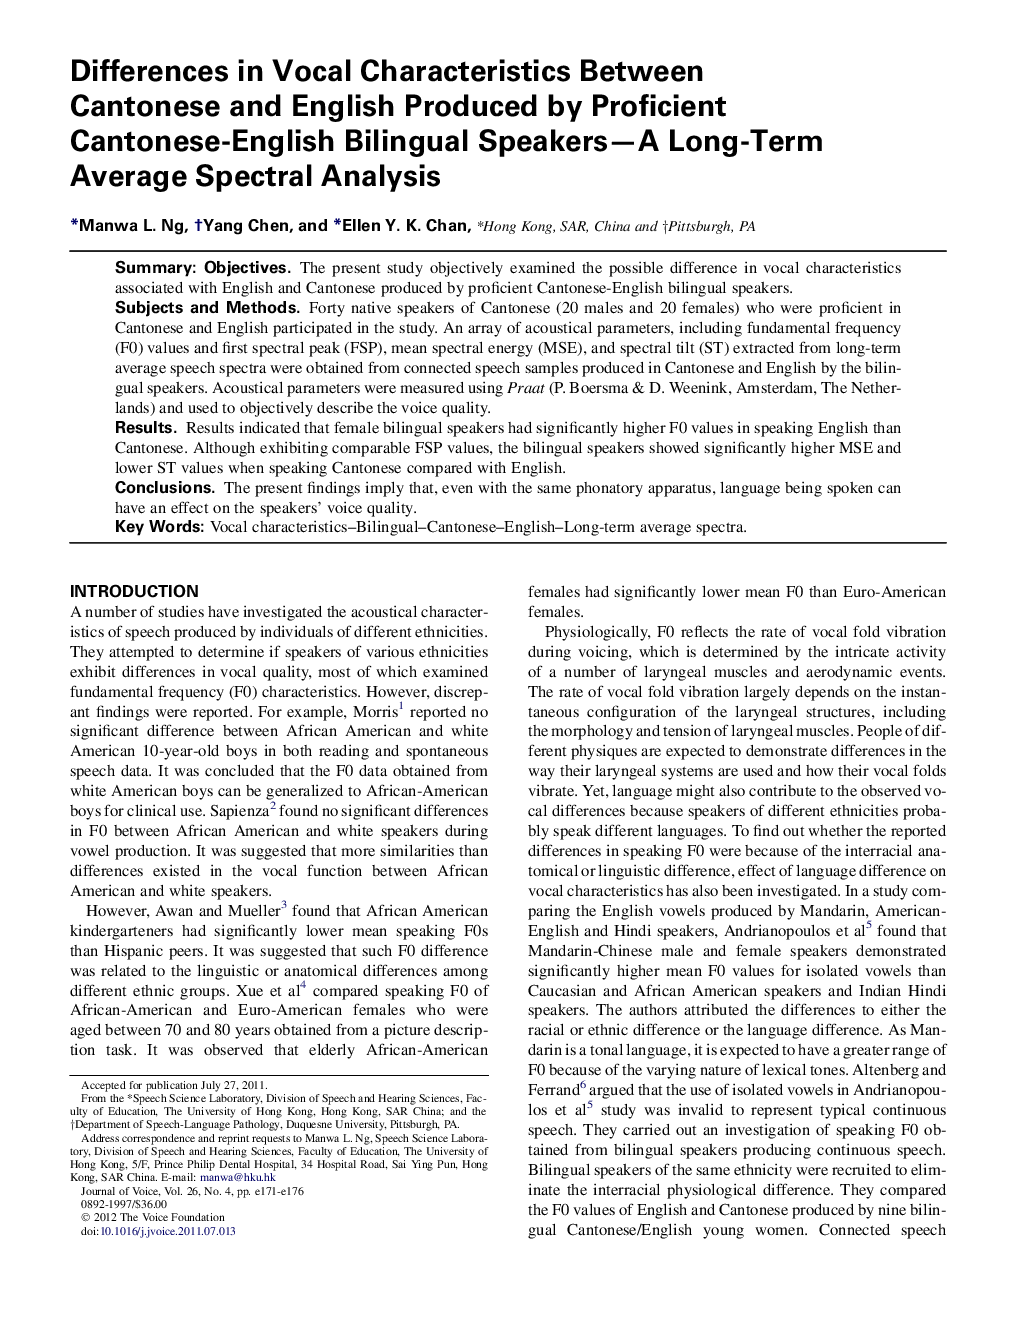 Differences in Vocal Characteristics Between Cantonese and English Produced by Proficient Cantonese-English Bilingual Speakers—A Long-Term Average Spectral Analysis